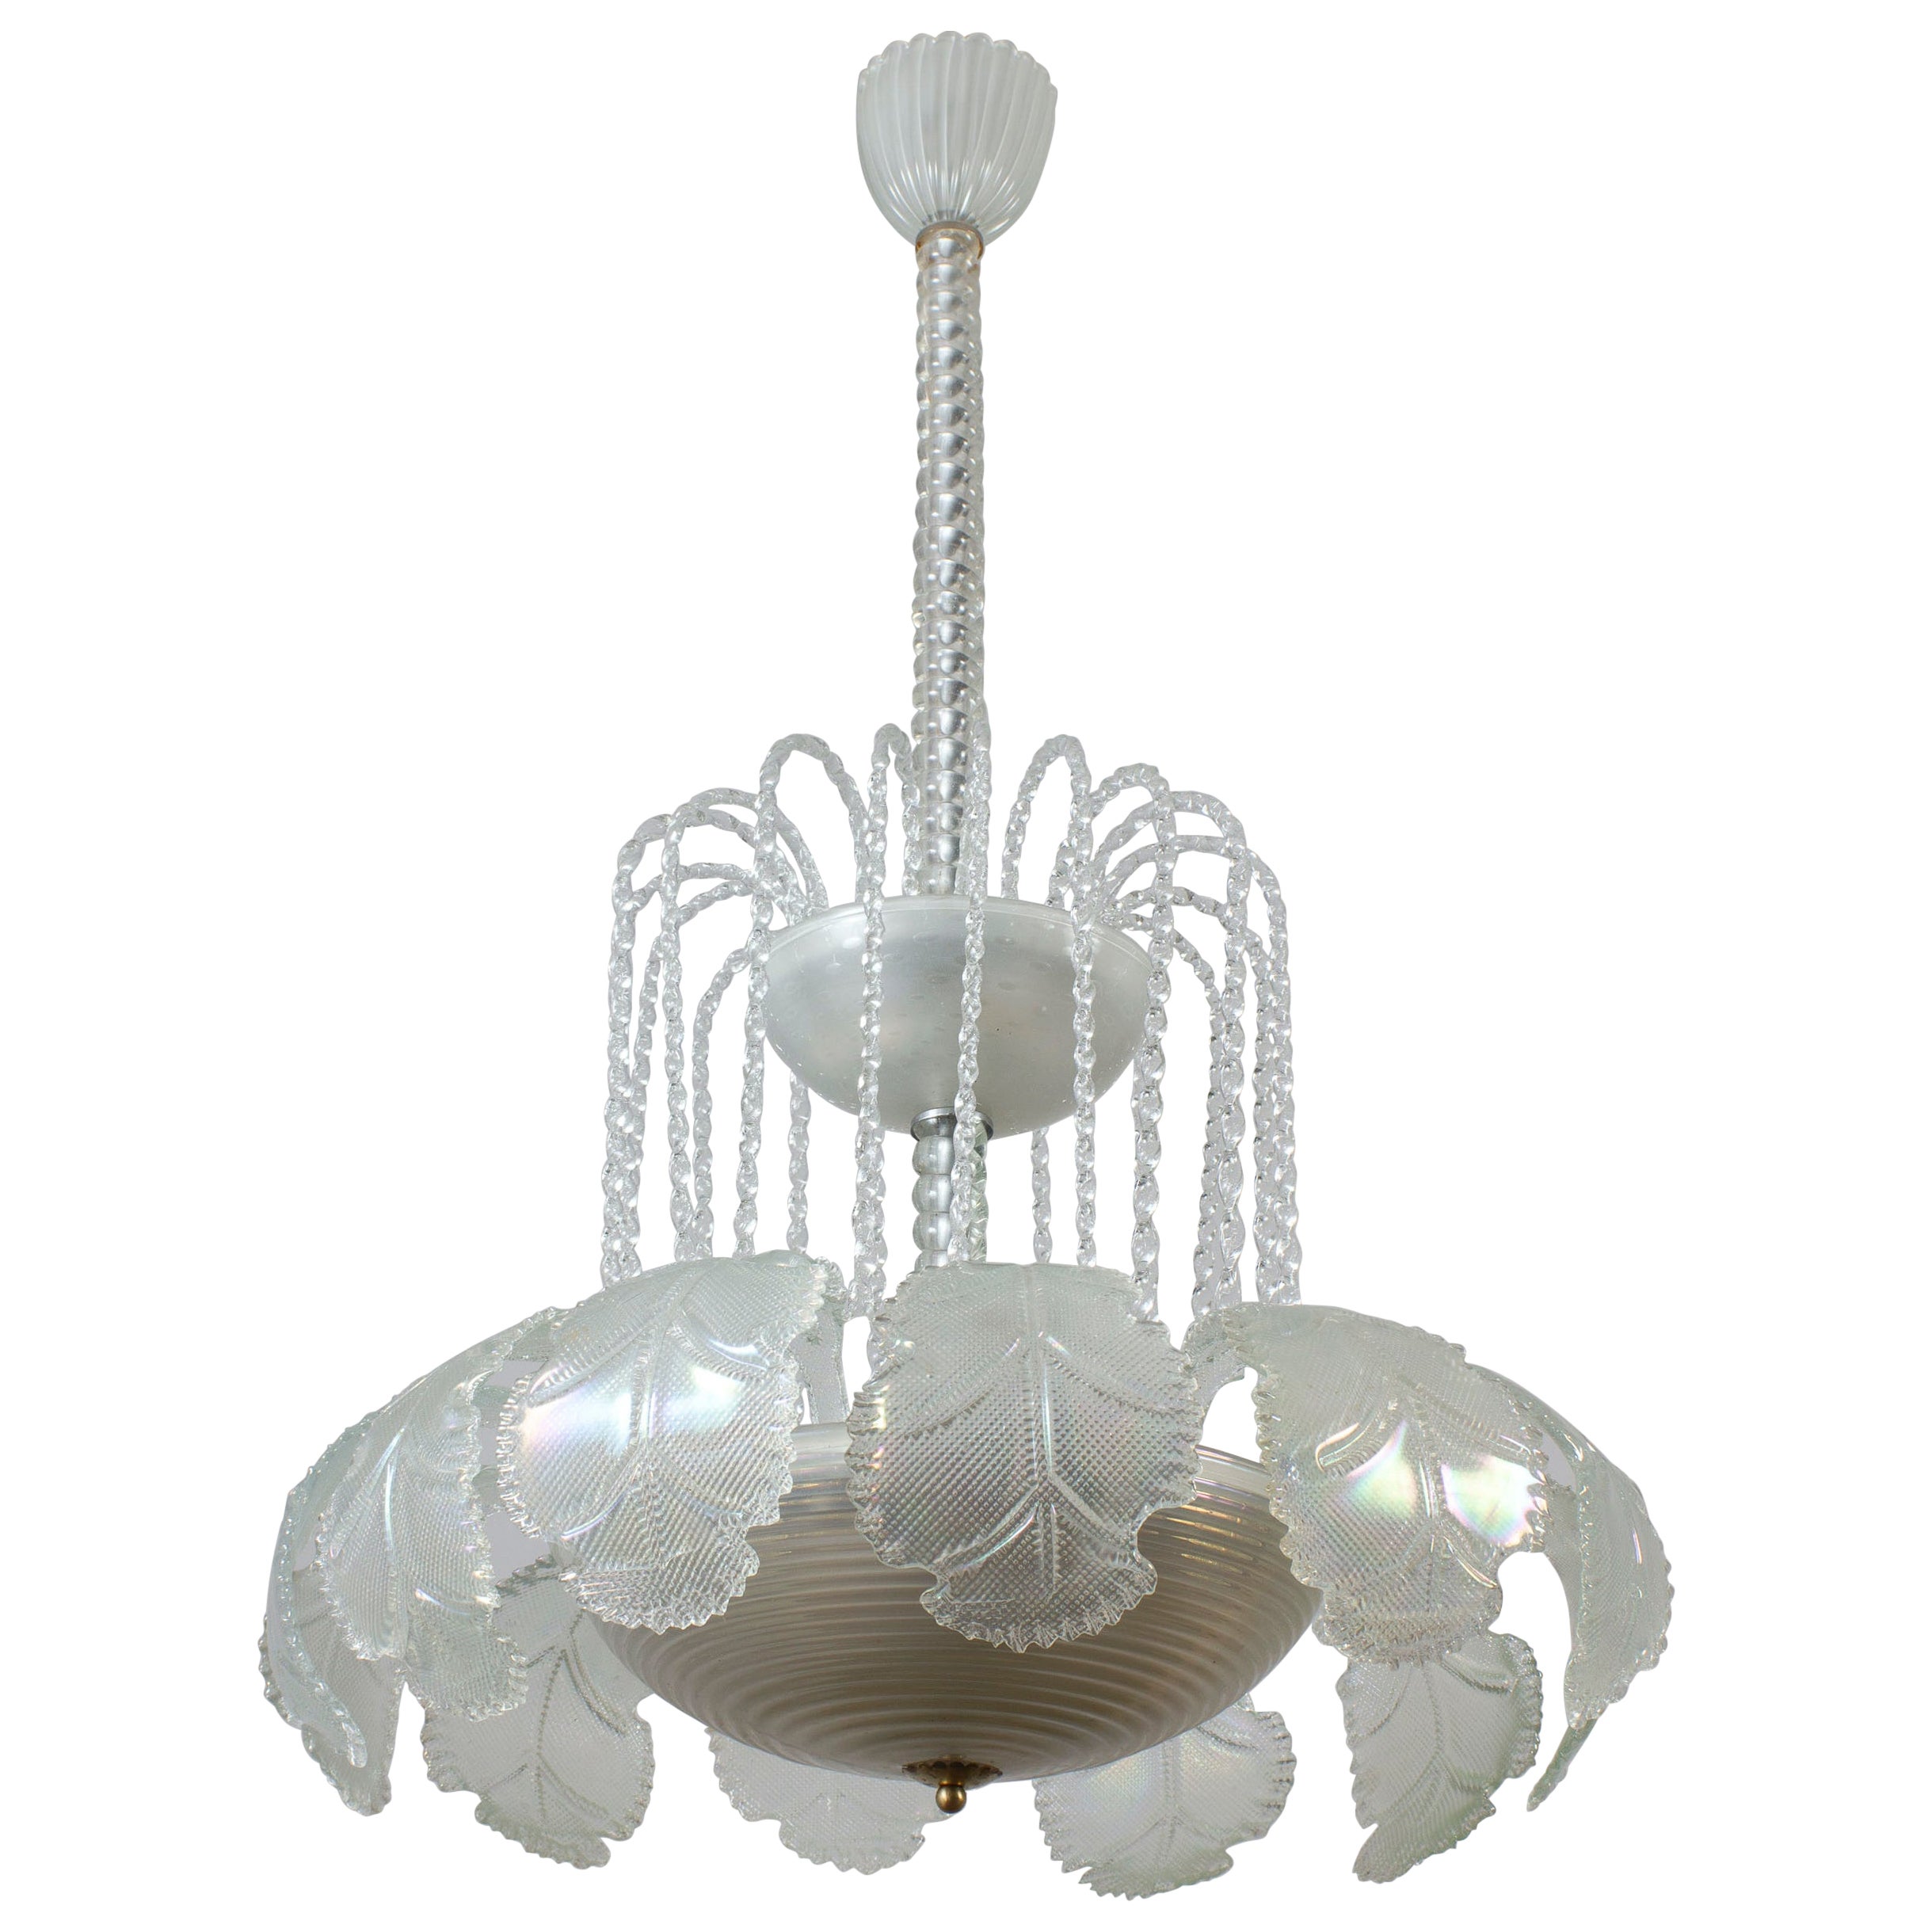 Superb Art Deco Ninfea Murano Glass Chandelier by Barovier Italy, 1940 For Sale